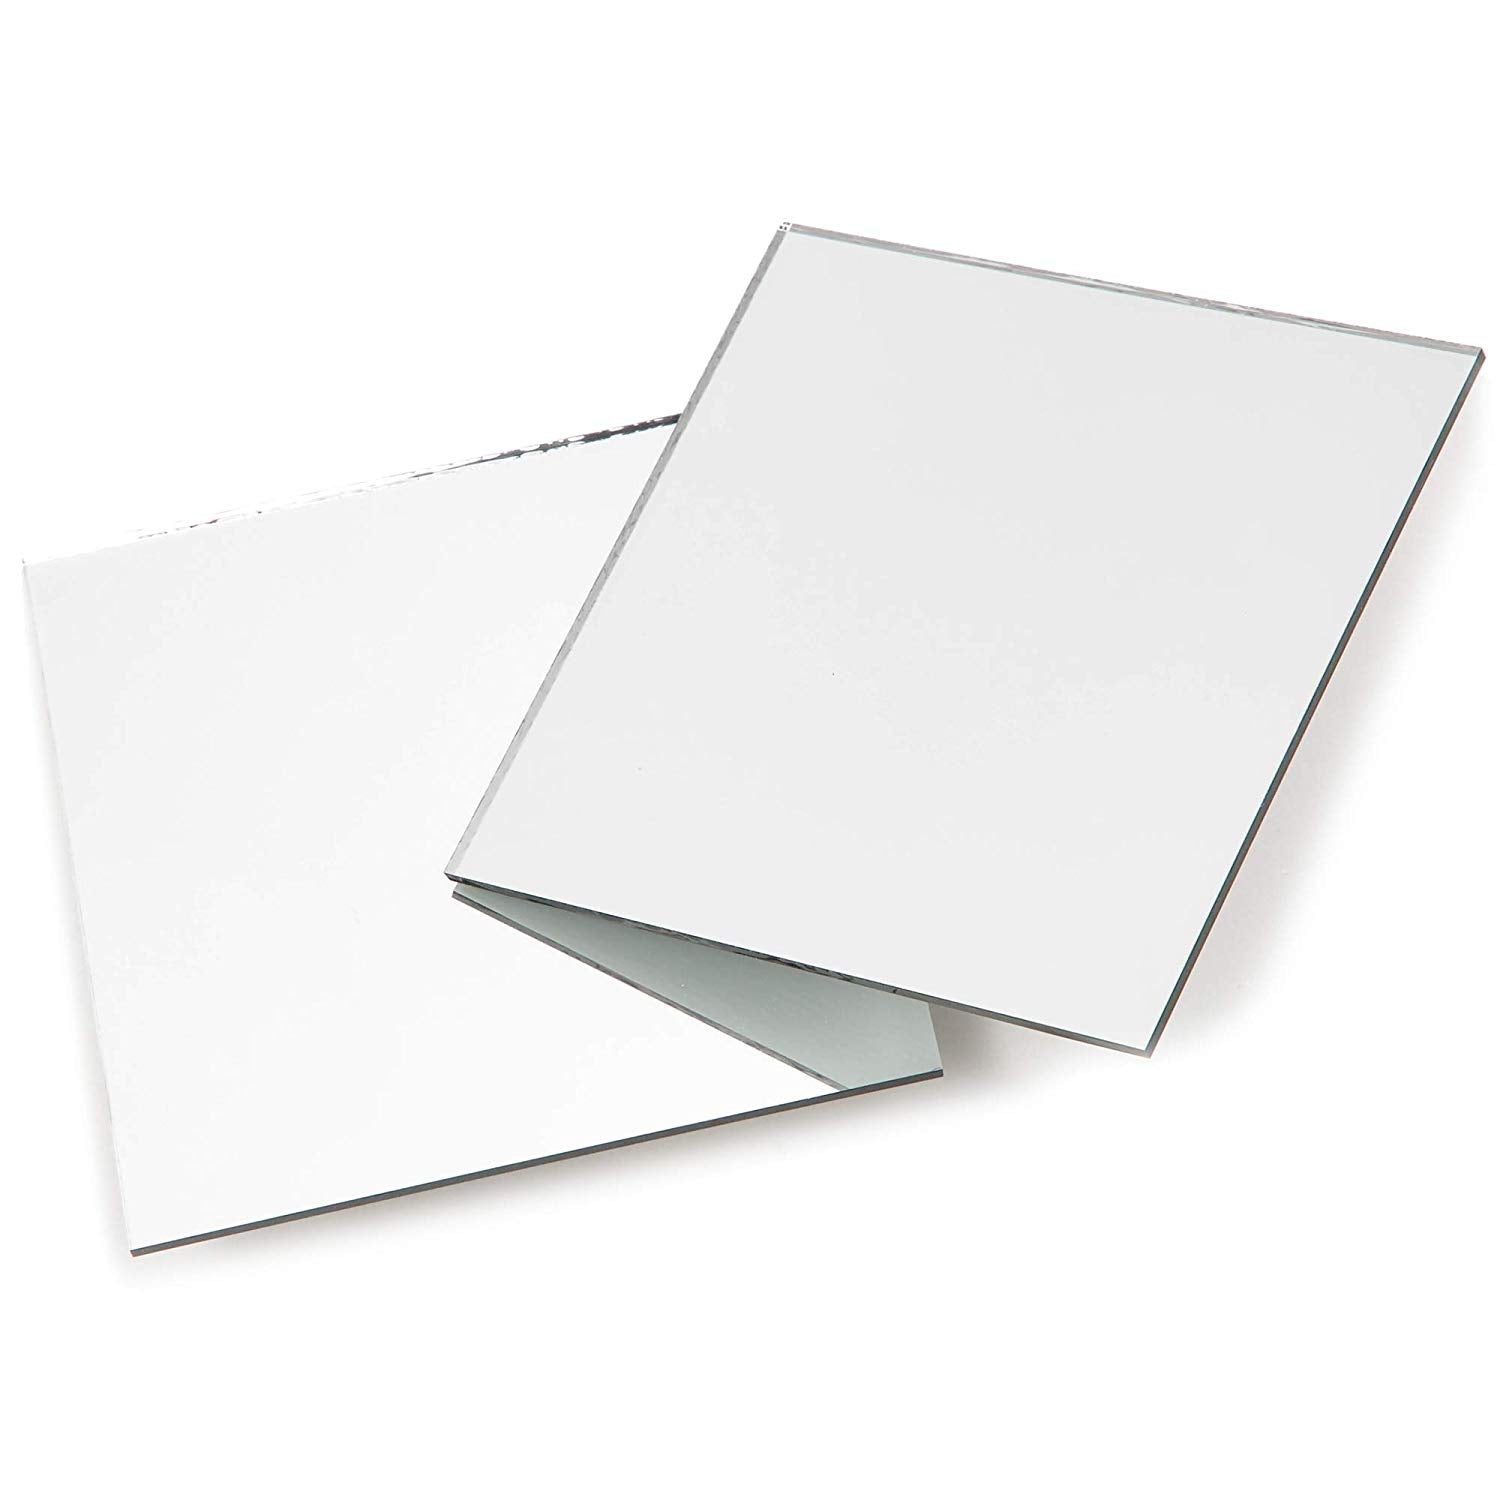 Juvale 1 inch Mirror Tiles for Crafts, 120 Pack Small Square Glass for Home Wall Decor, Mosaics